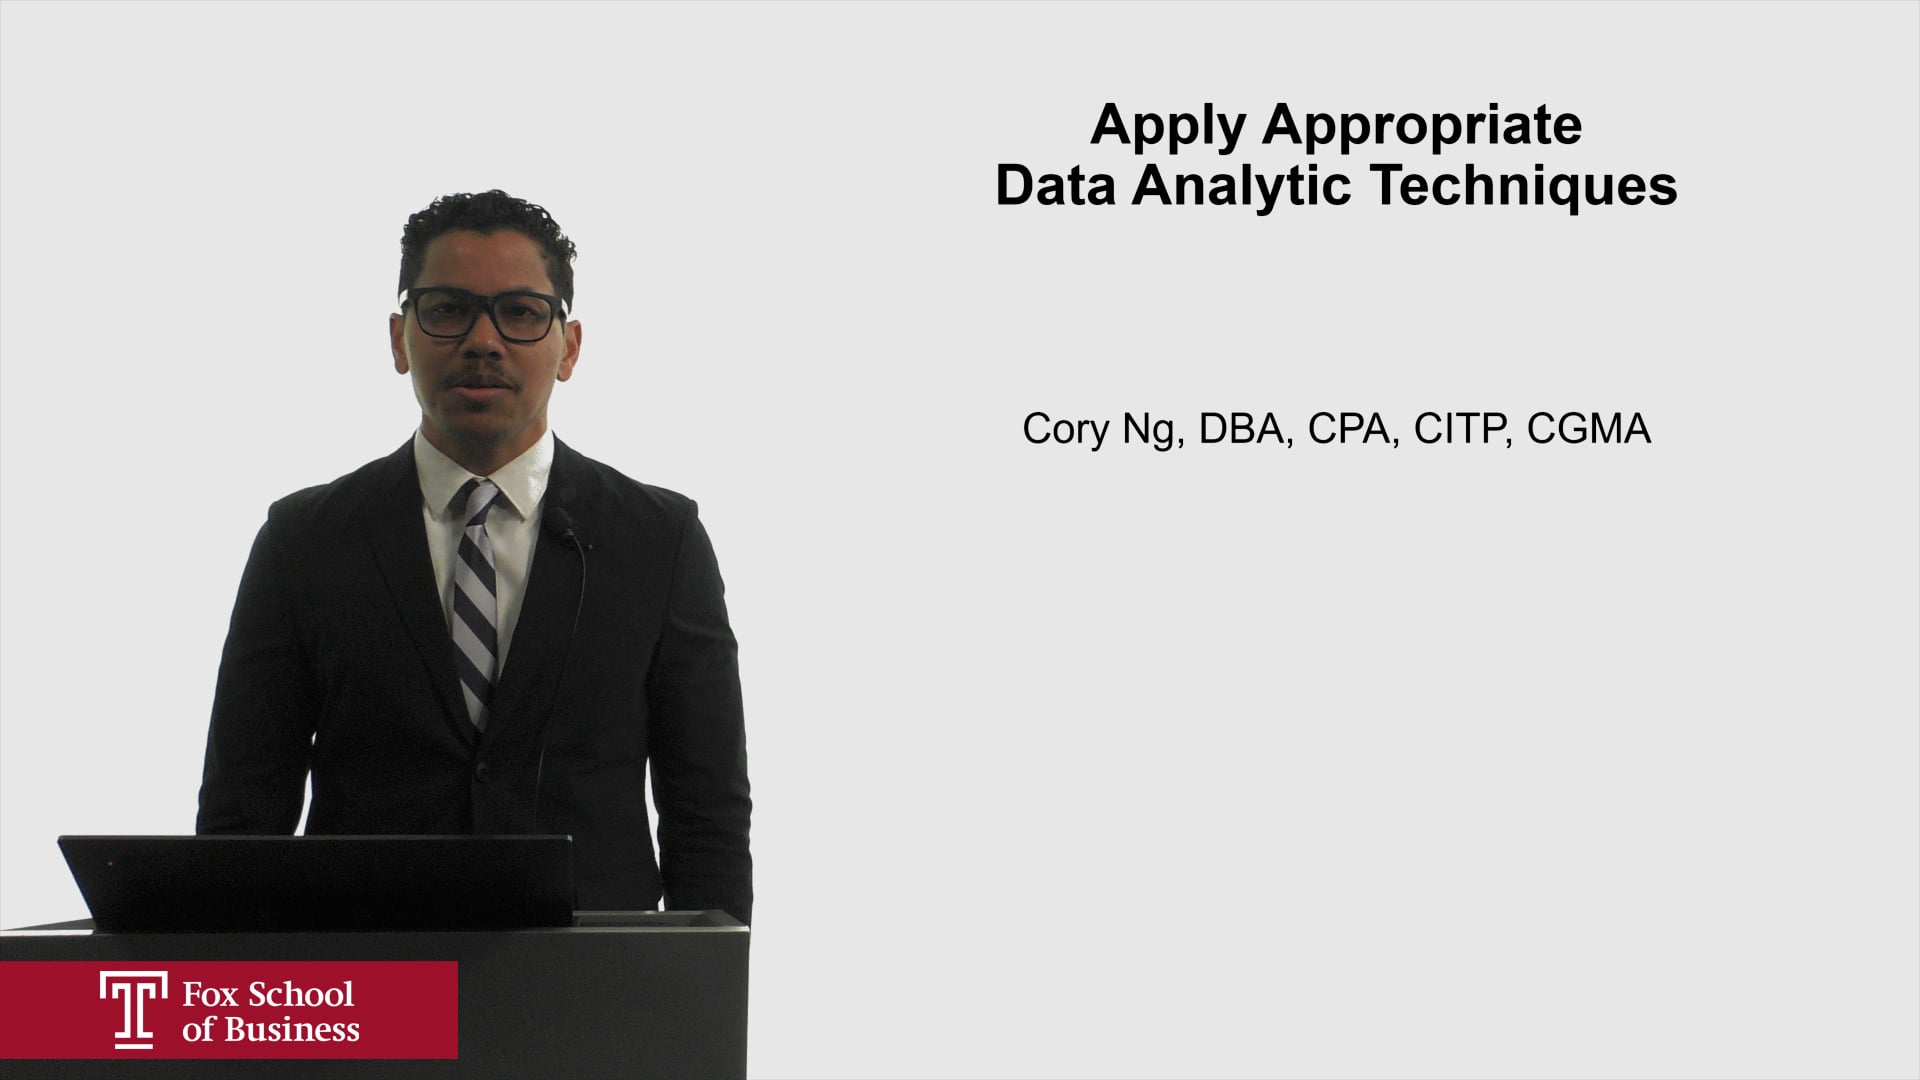 Apply Appropriate Data Analytic Techniques